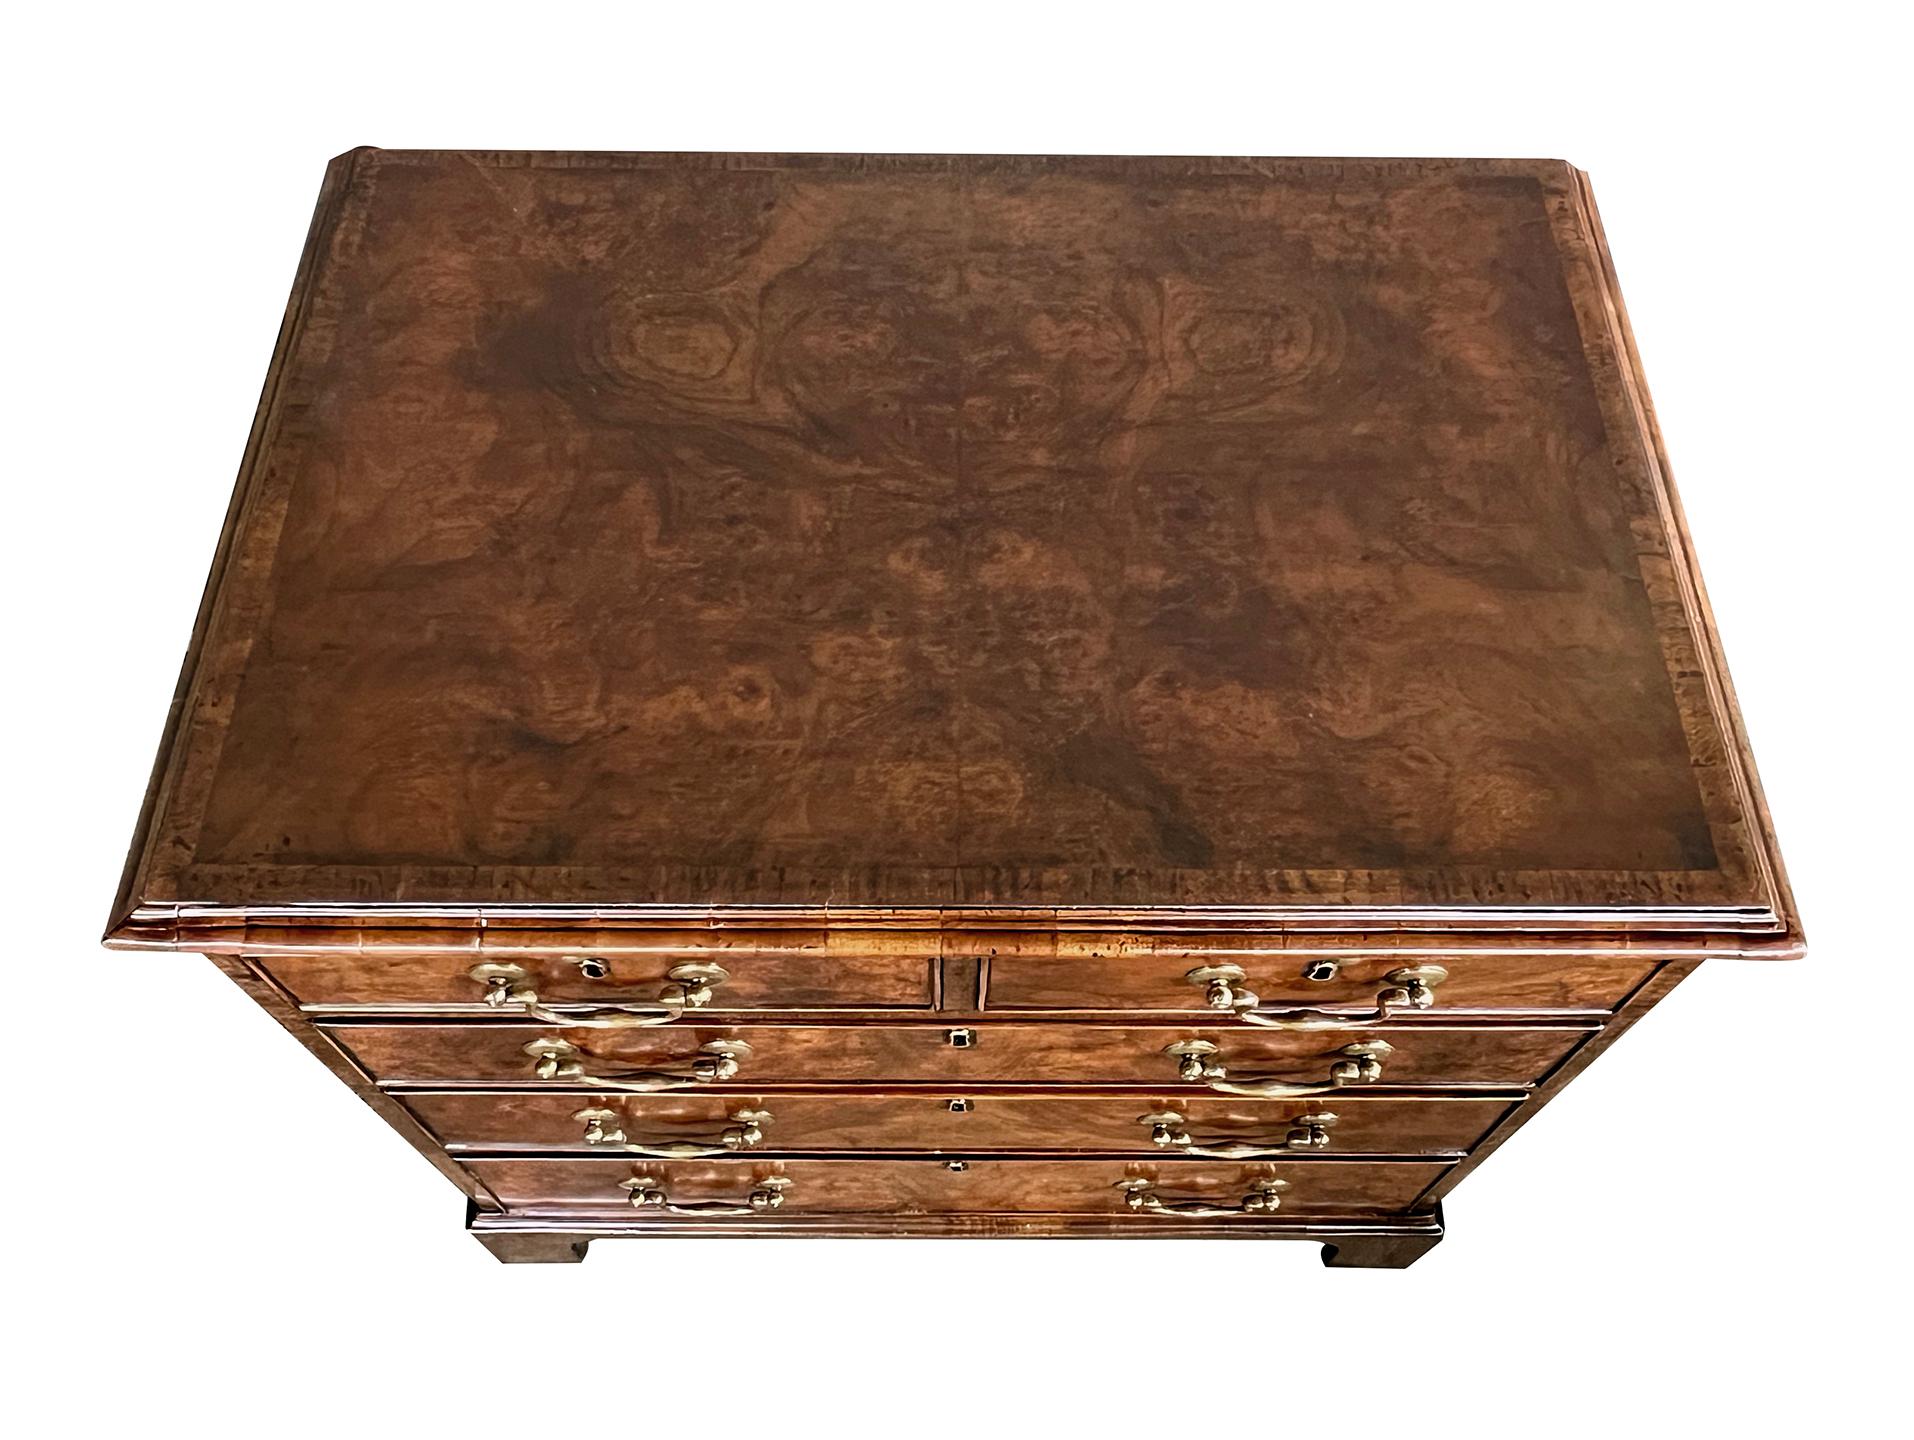 known for their exceptional quality reproductions each Burton-Ching chest fitted with a hand-tooled leather brushing slide above two short and three long drawers; Provenance:
Property from the Collection of Craig Wright, Los Angeles, CA.